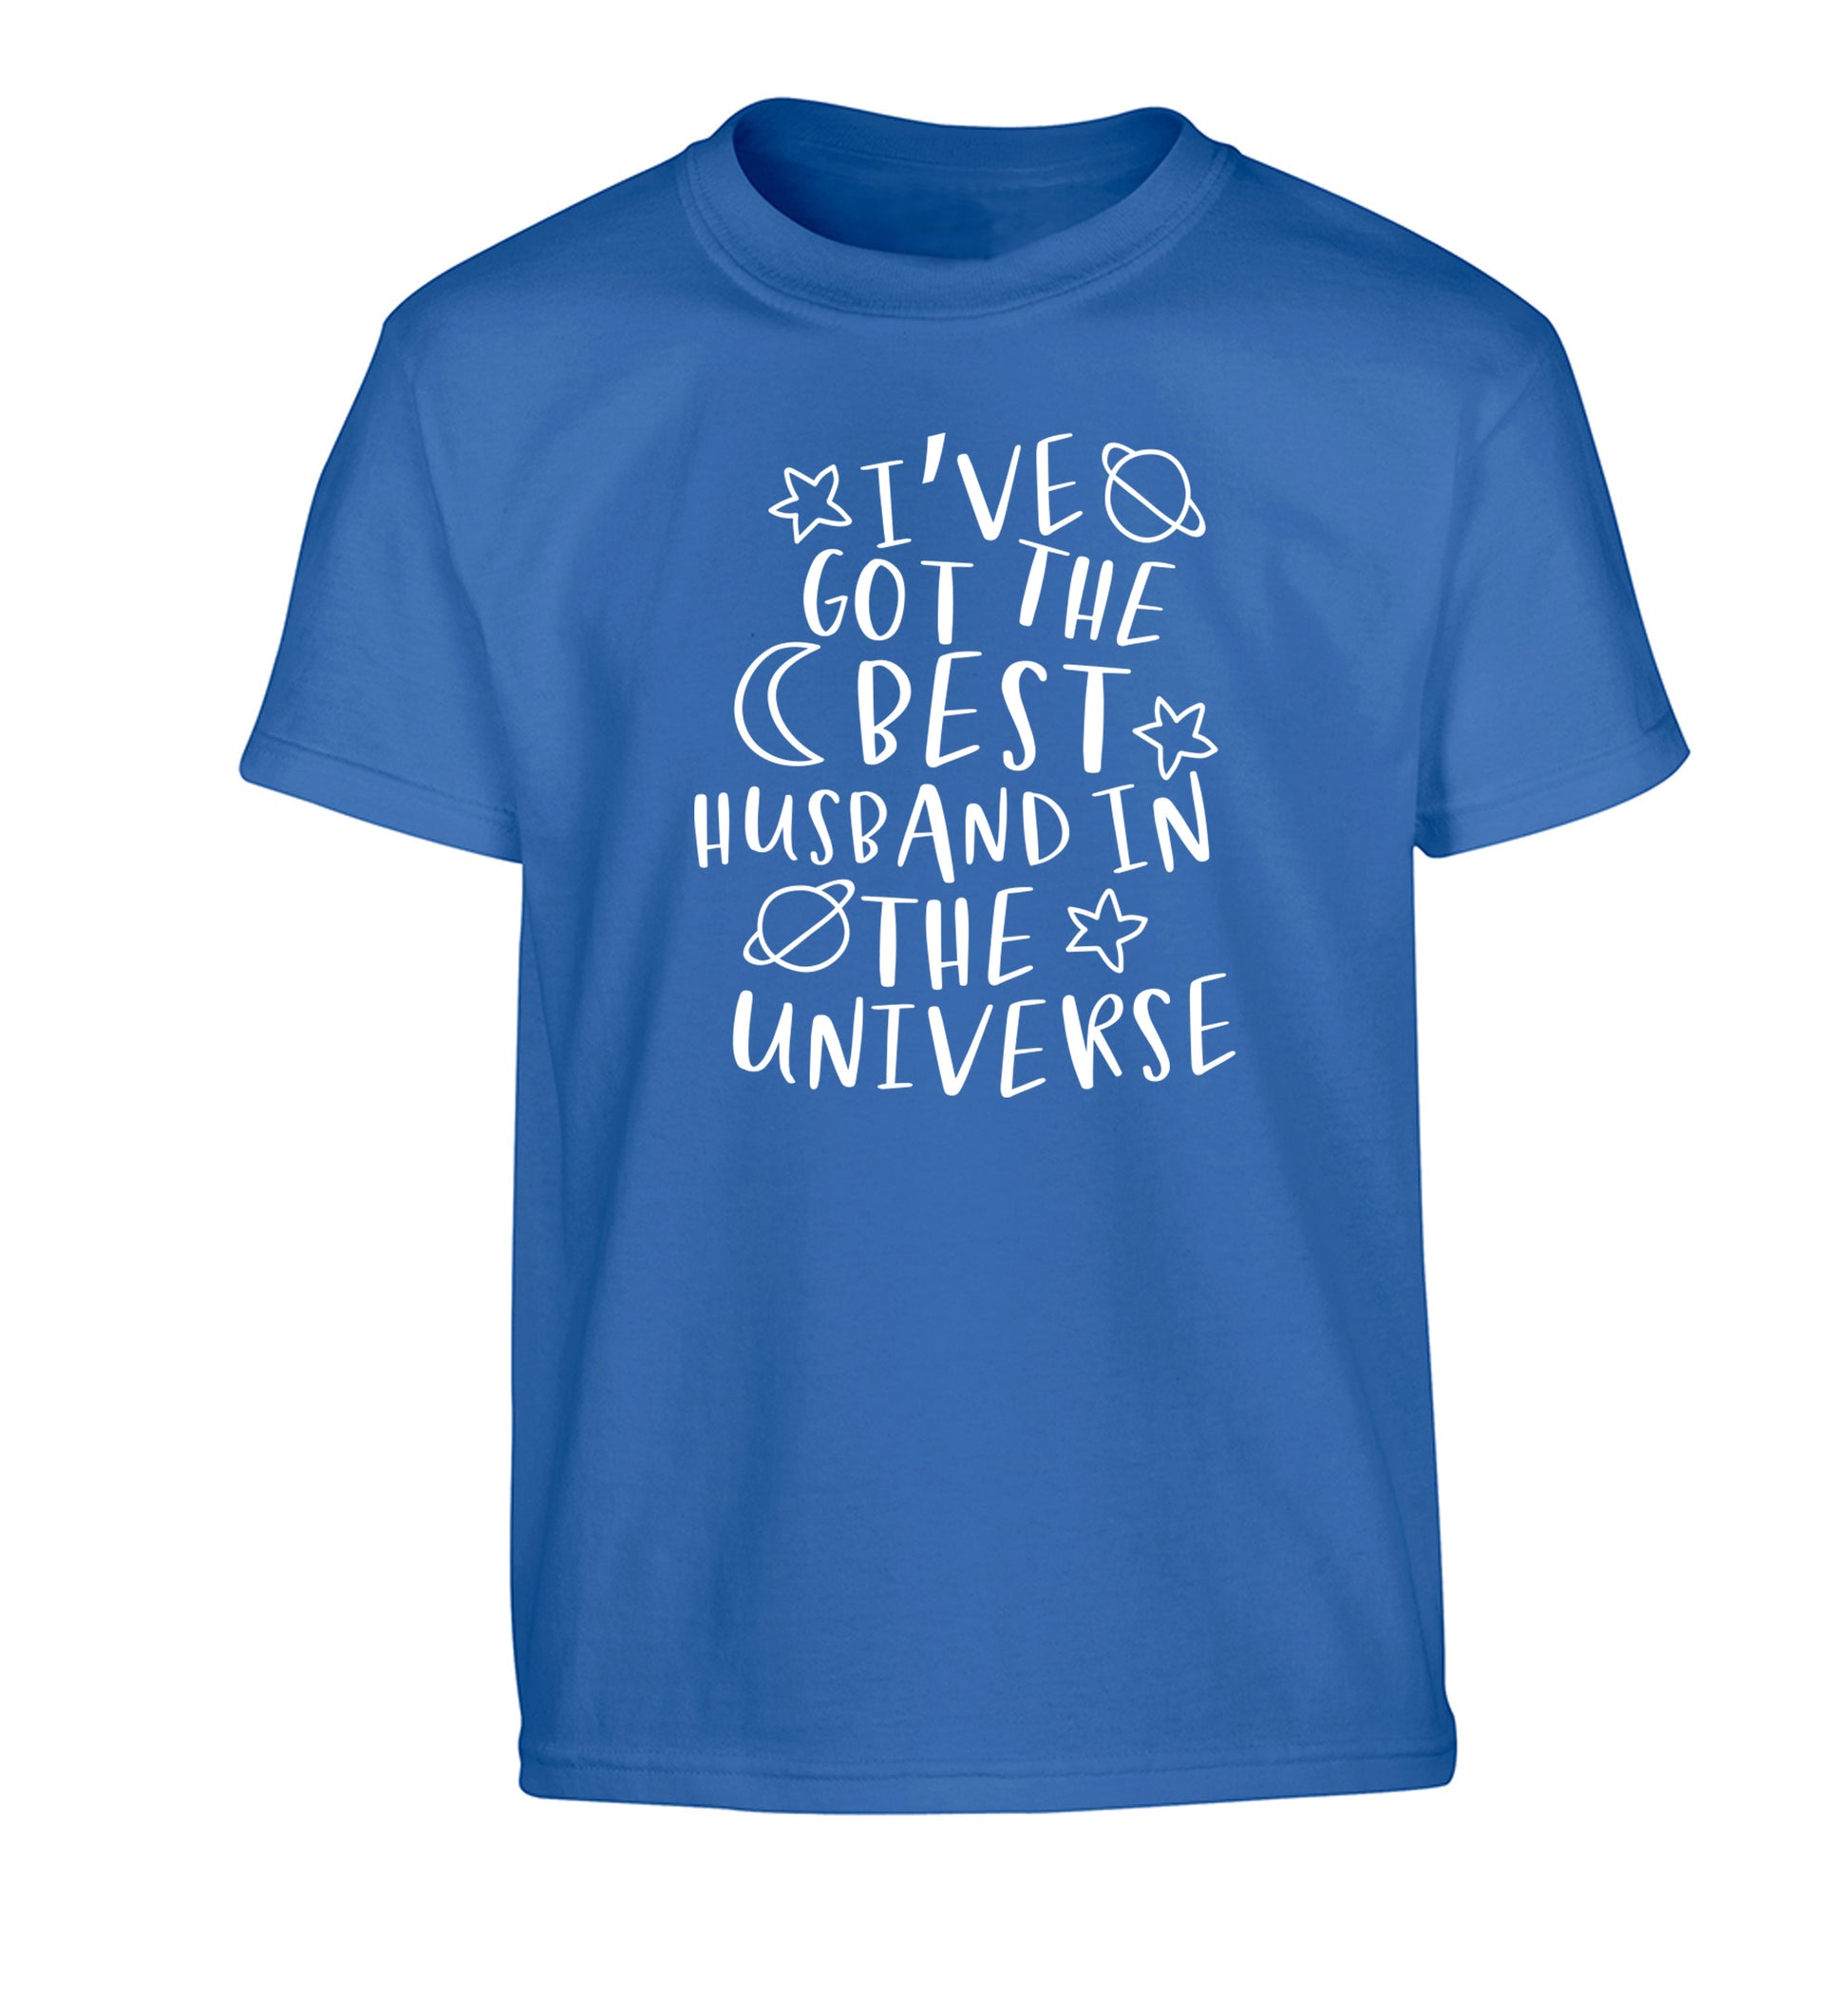 I've got the best husband in the universe Children's blue Tshirt 12-13 Years